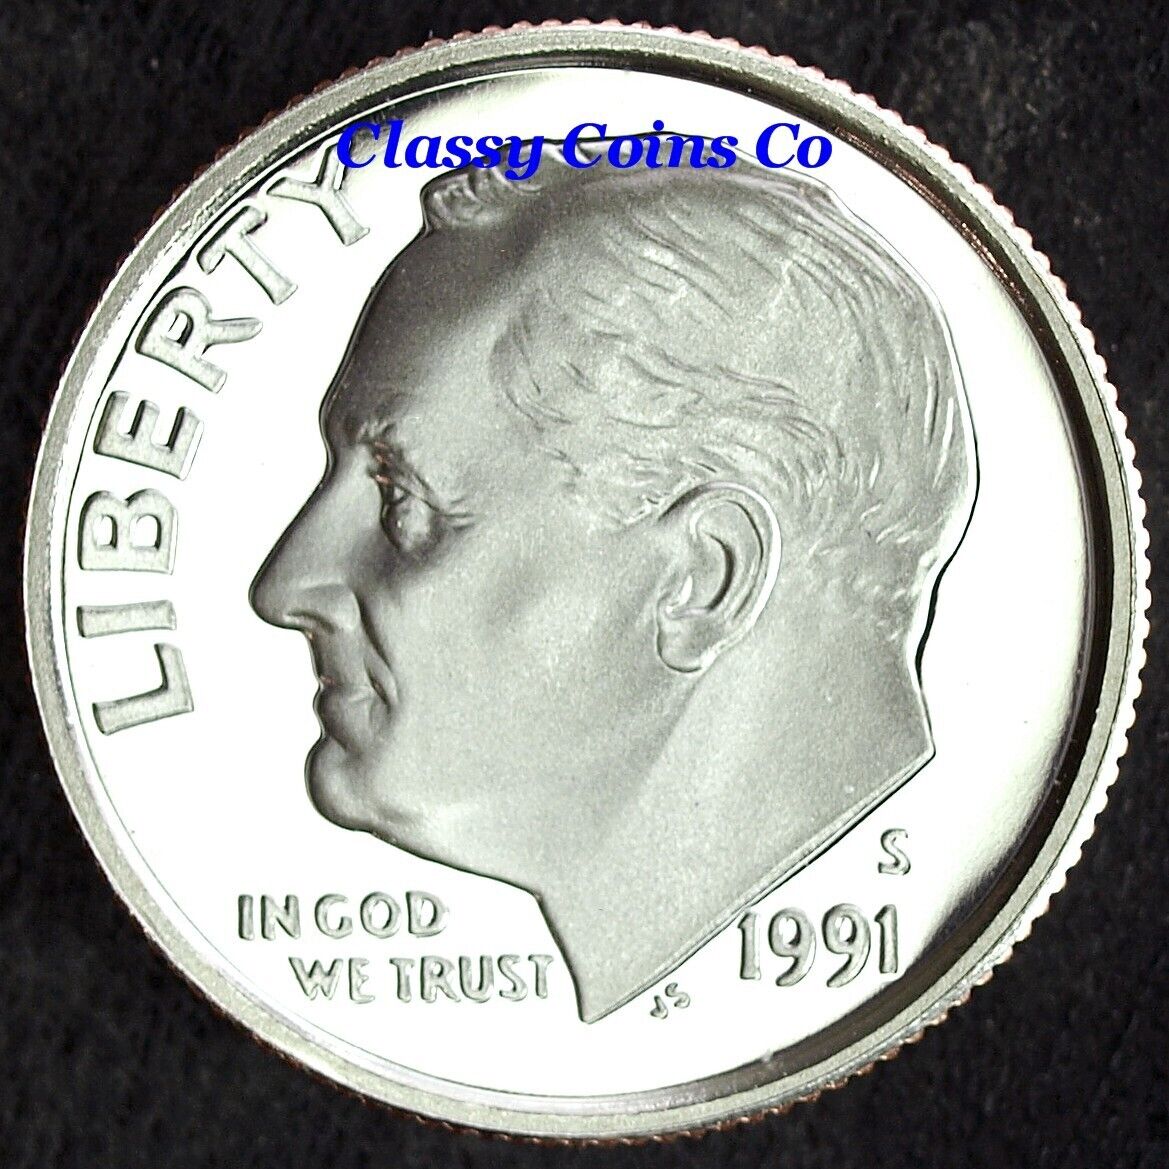 1991 S Clad Proof Roosevelt Dime ☆☆ Great Set Filler ☆☆ Great Collectible